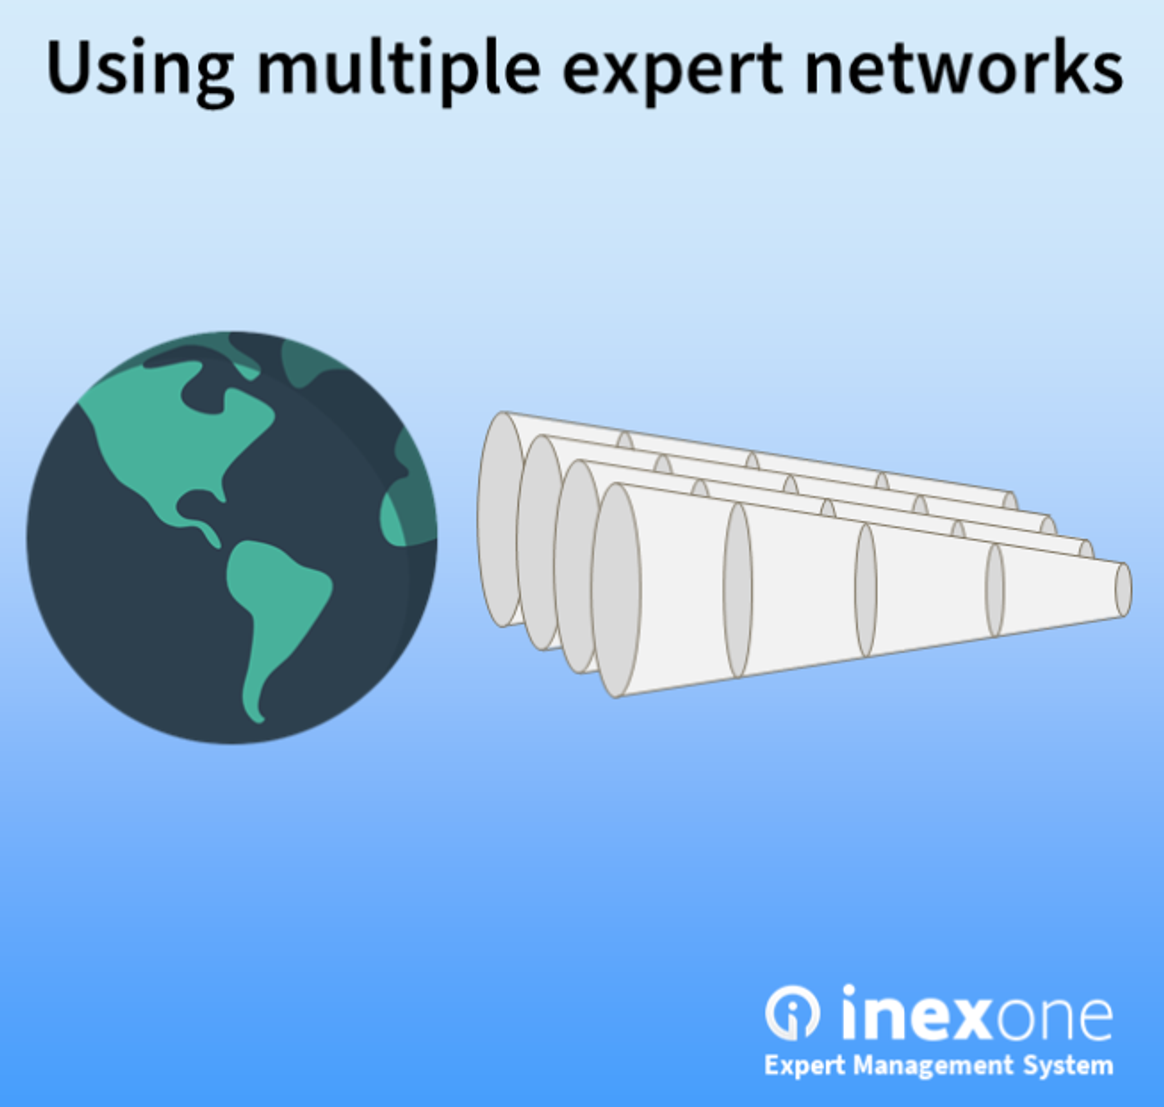 Illustration of how multiple expert networks act as multiple funnels of experts, searching the globe.